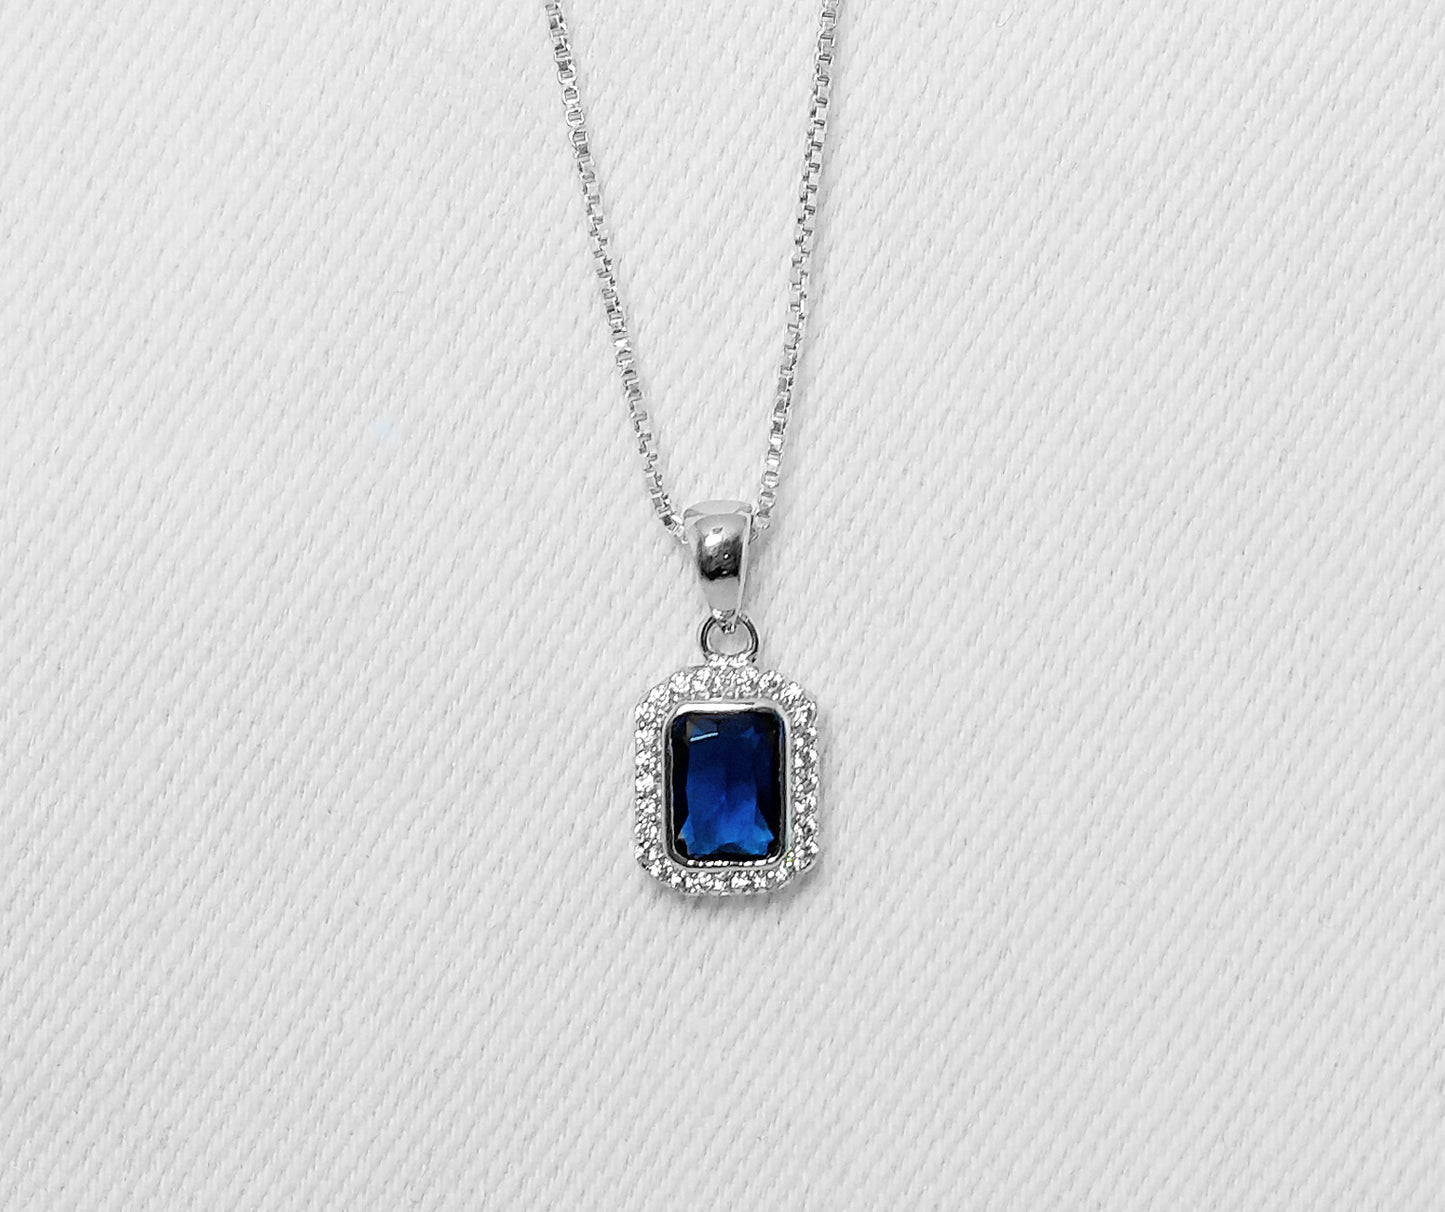 Sterling Silver Pendant with Cubic Zirconia Stones. Deep Blue Colour